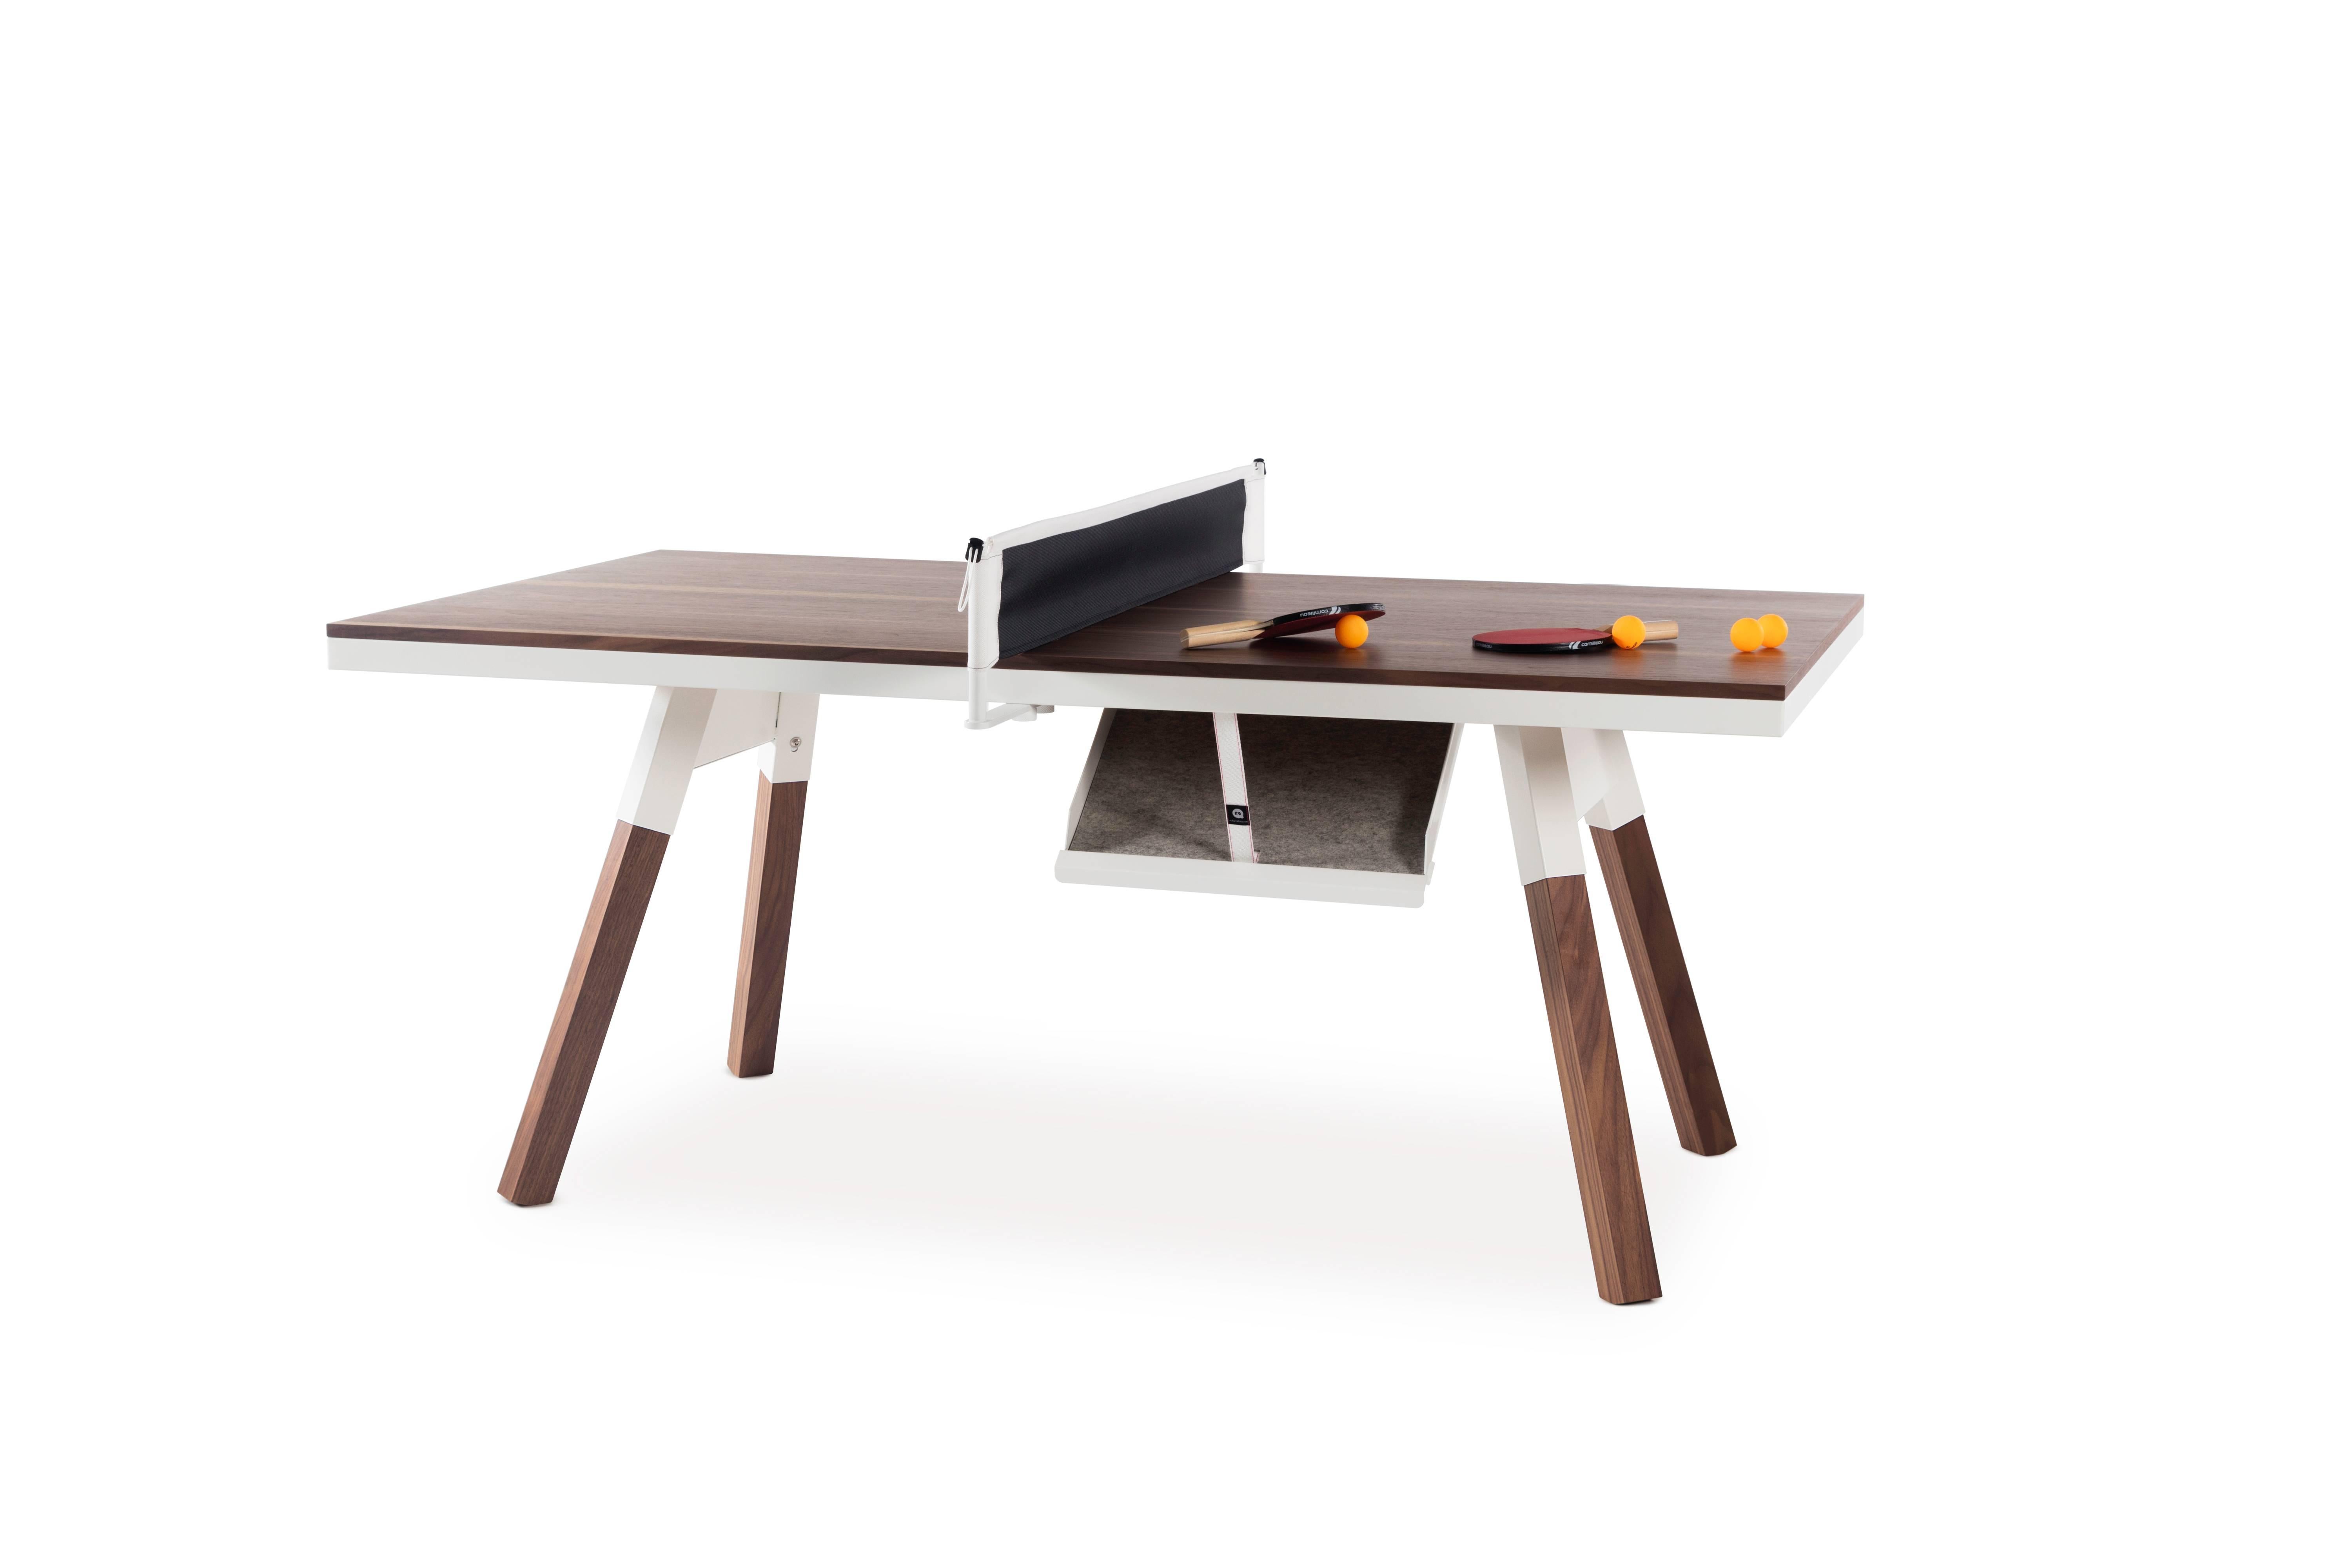 With our wood topped Small You and Me ping-pong table, we’ve taken our playful attitude indoors. Wood offers comfort and elegance, while sportiness blends in seamlessly in new settings. There’s a place for everything with a You and Me. There’s a